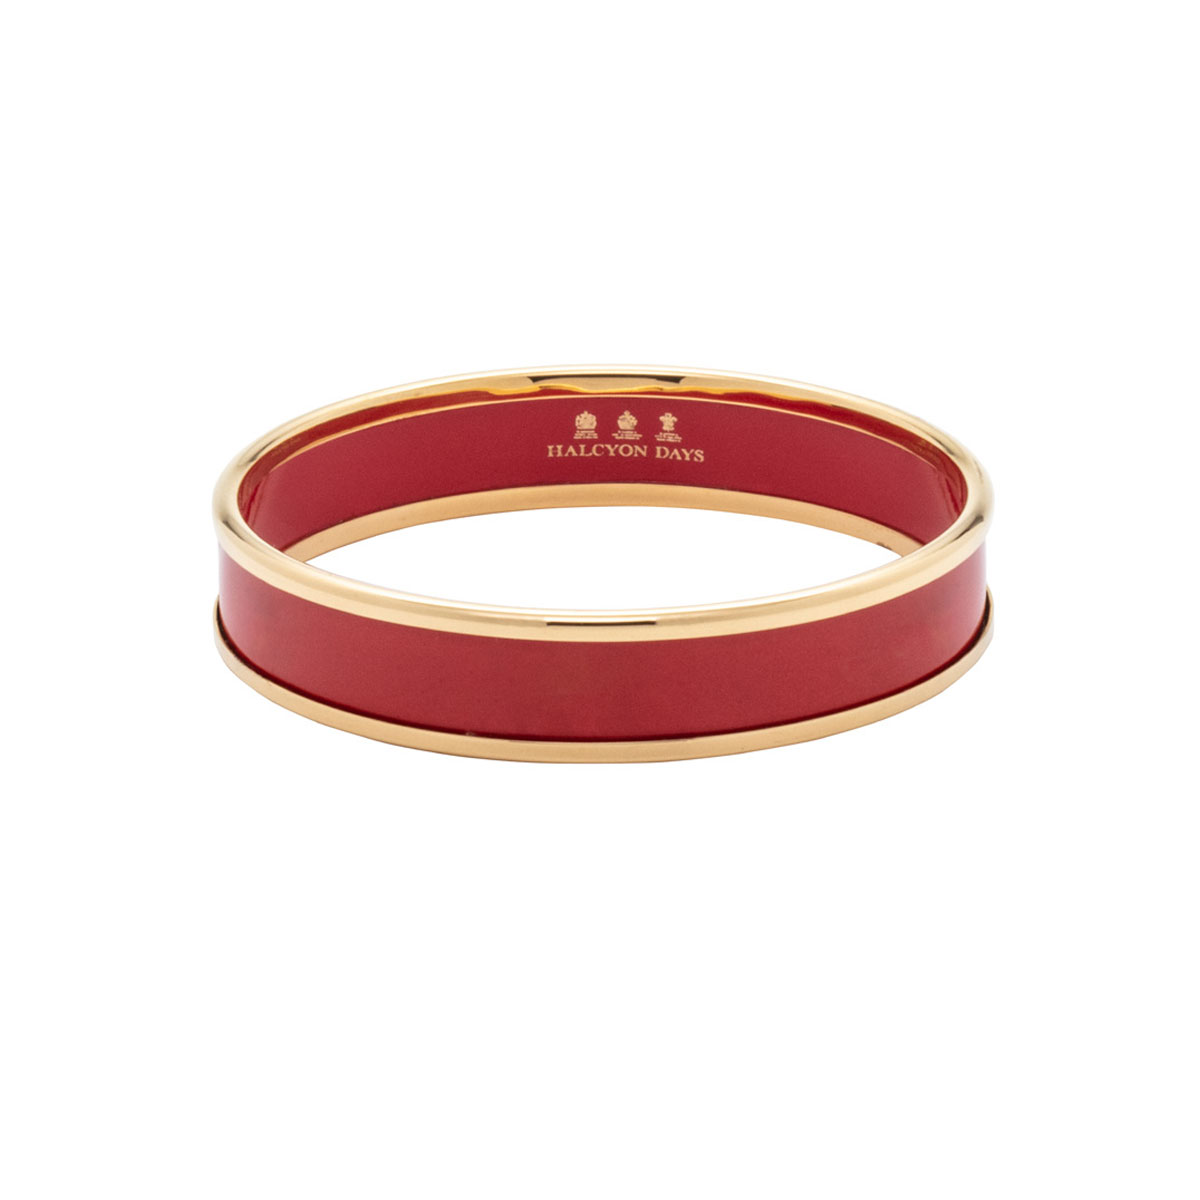 Halcyon Days 1cm Deep Red Gold Small Bangle